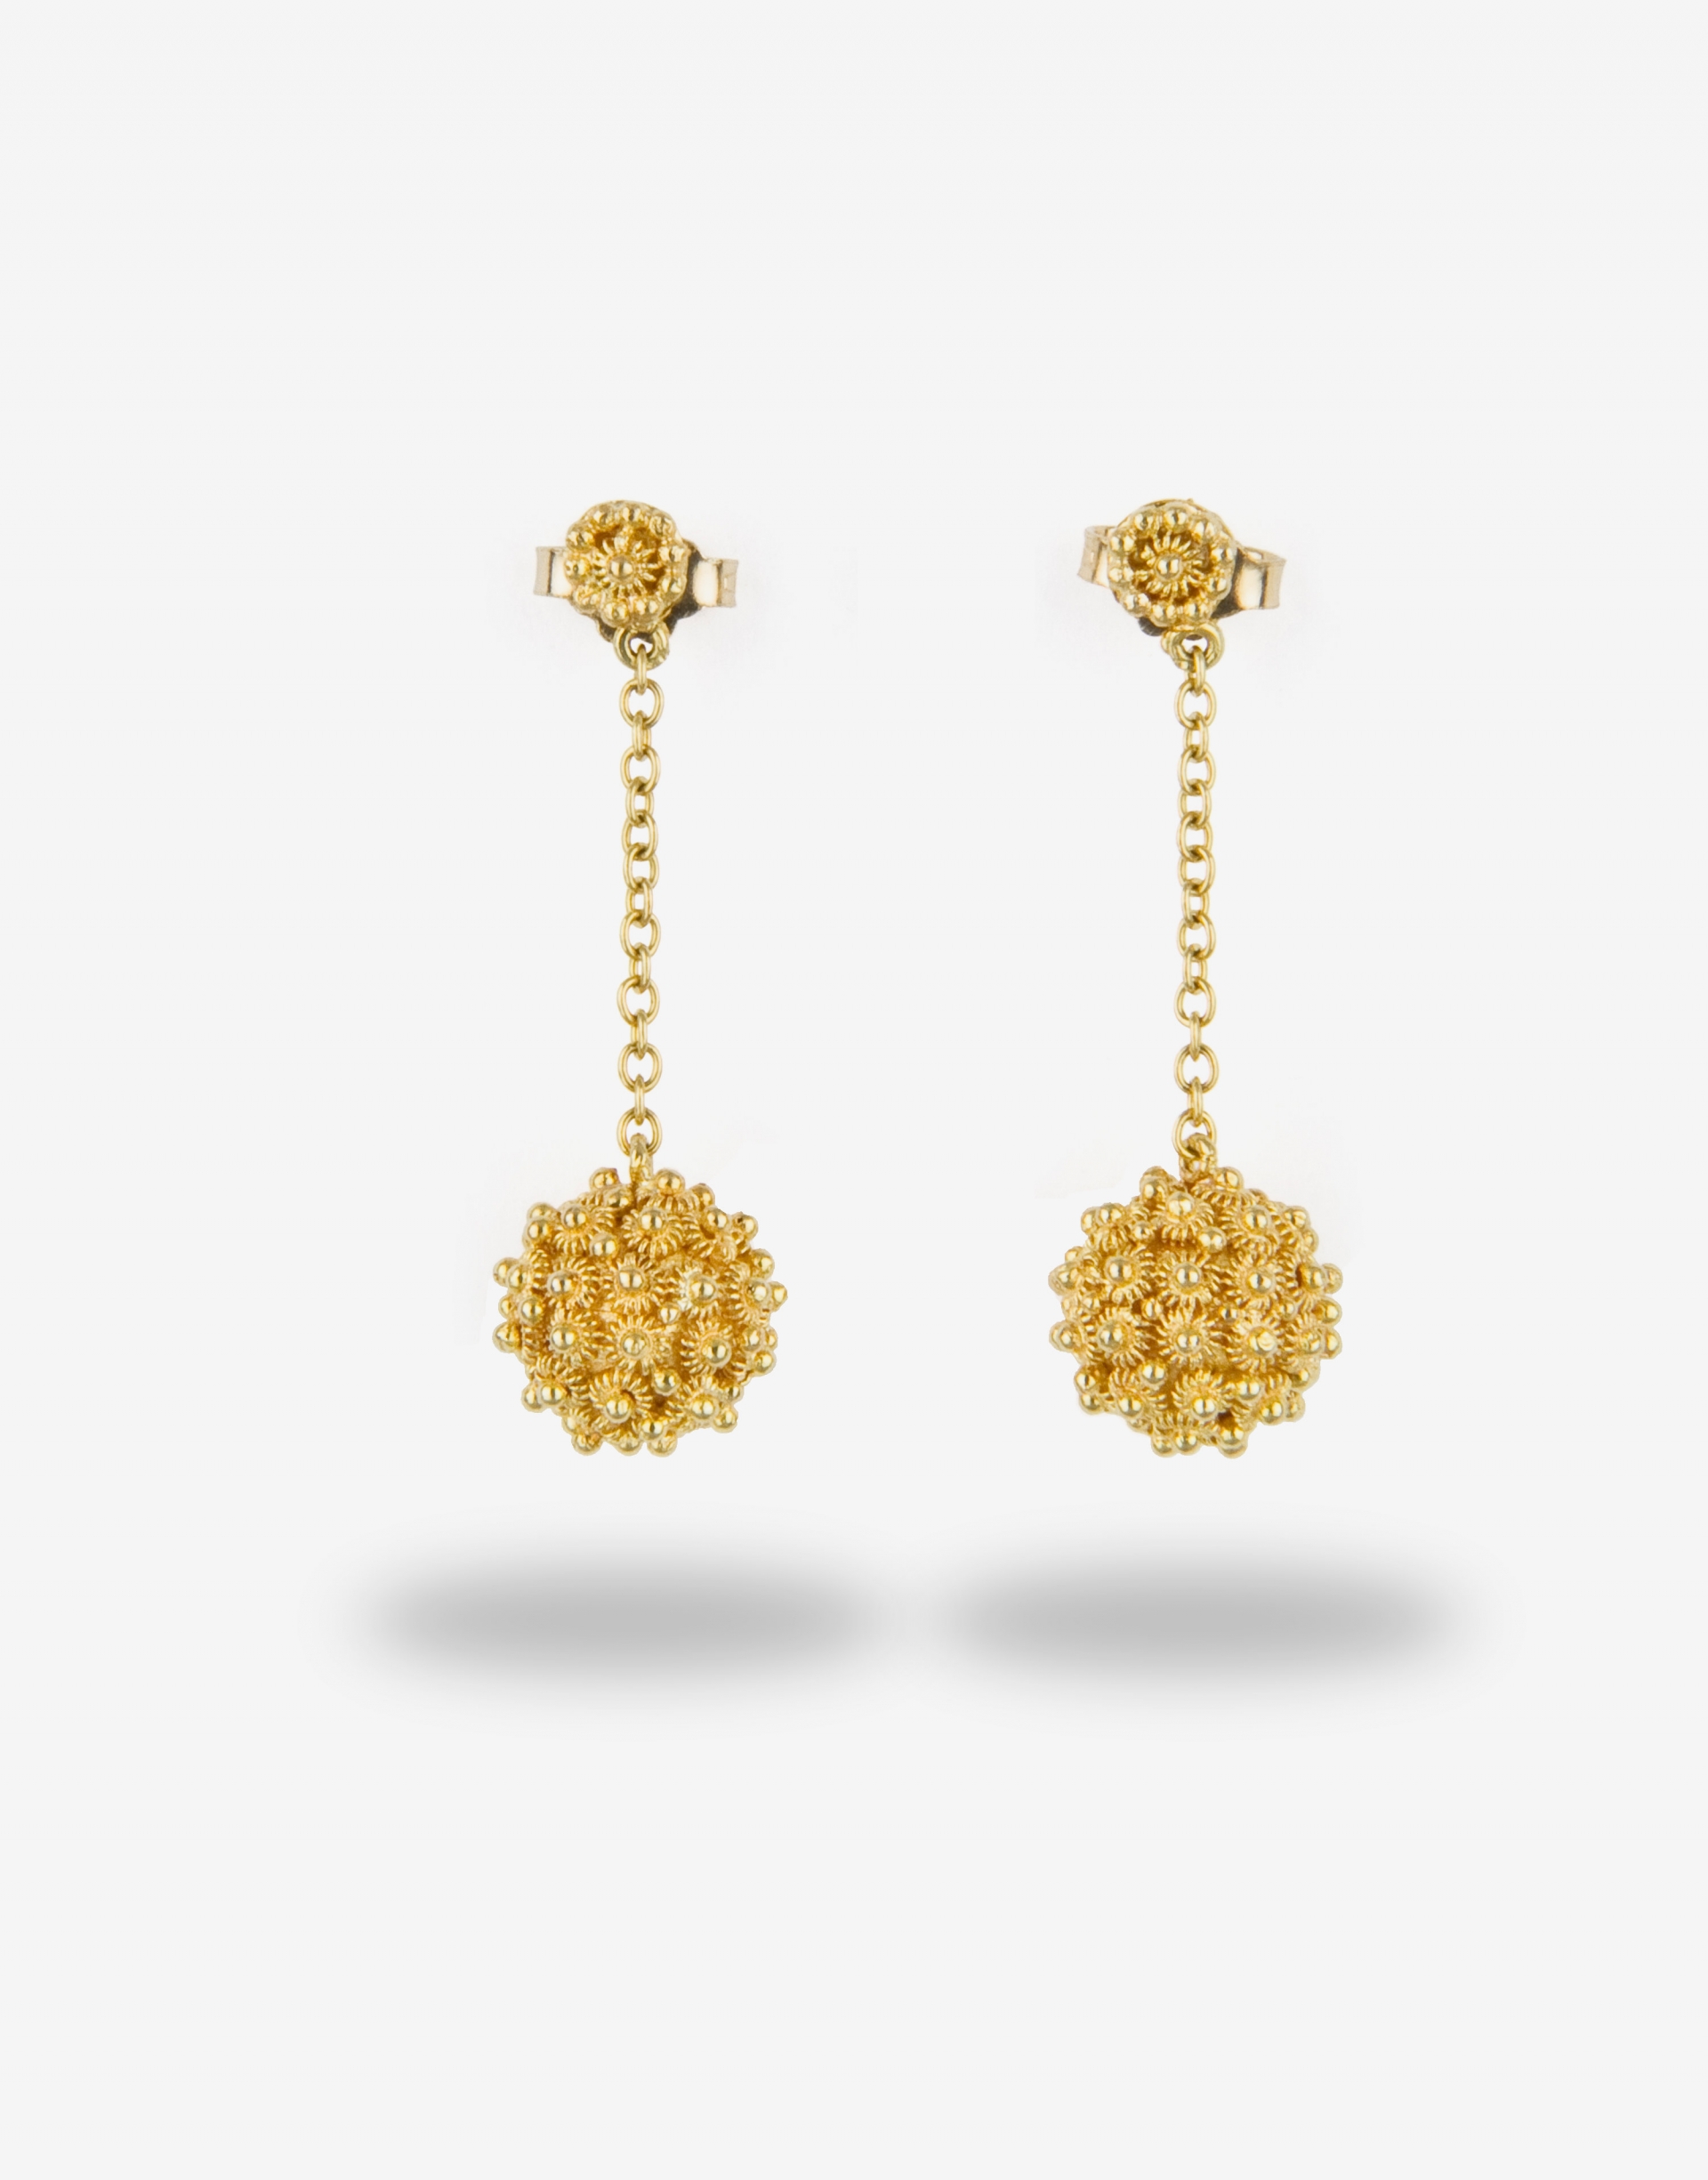 Real Gold Intricate Earrings 18kt Gold